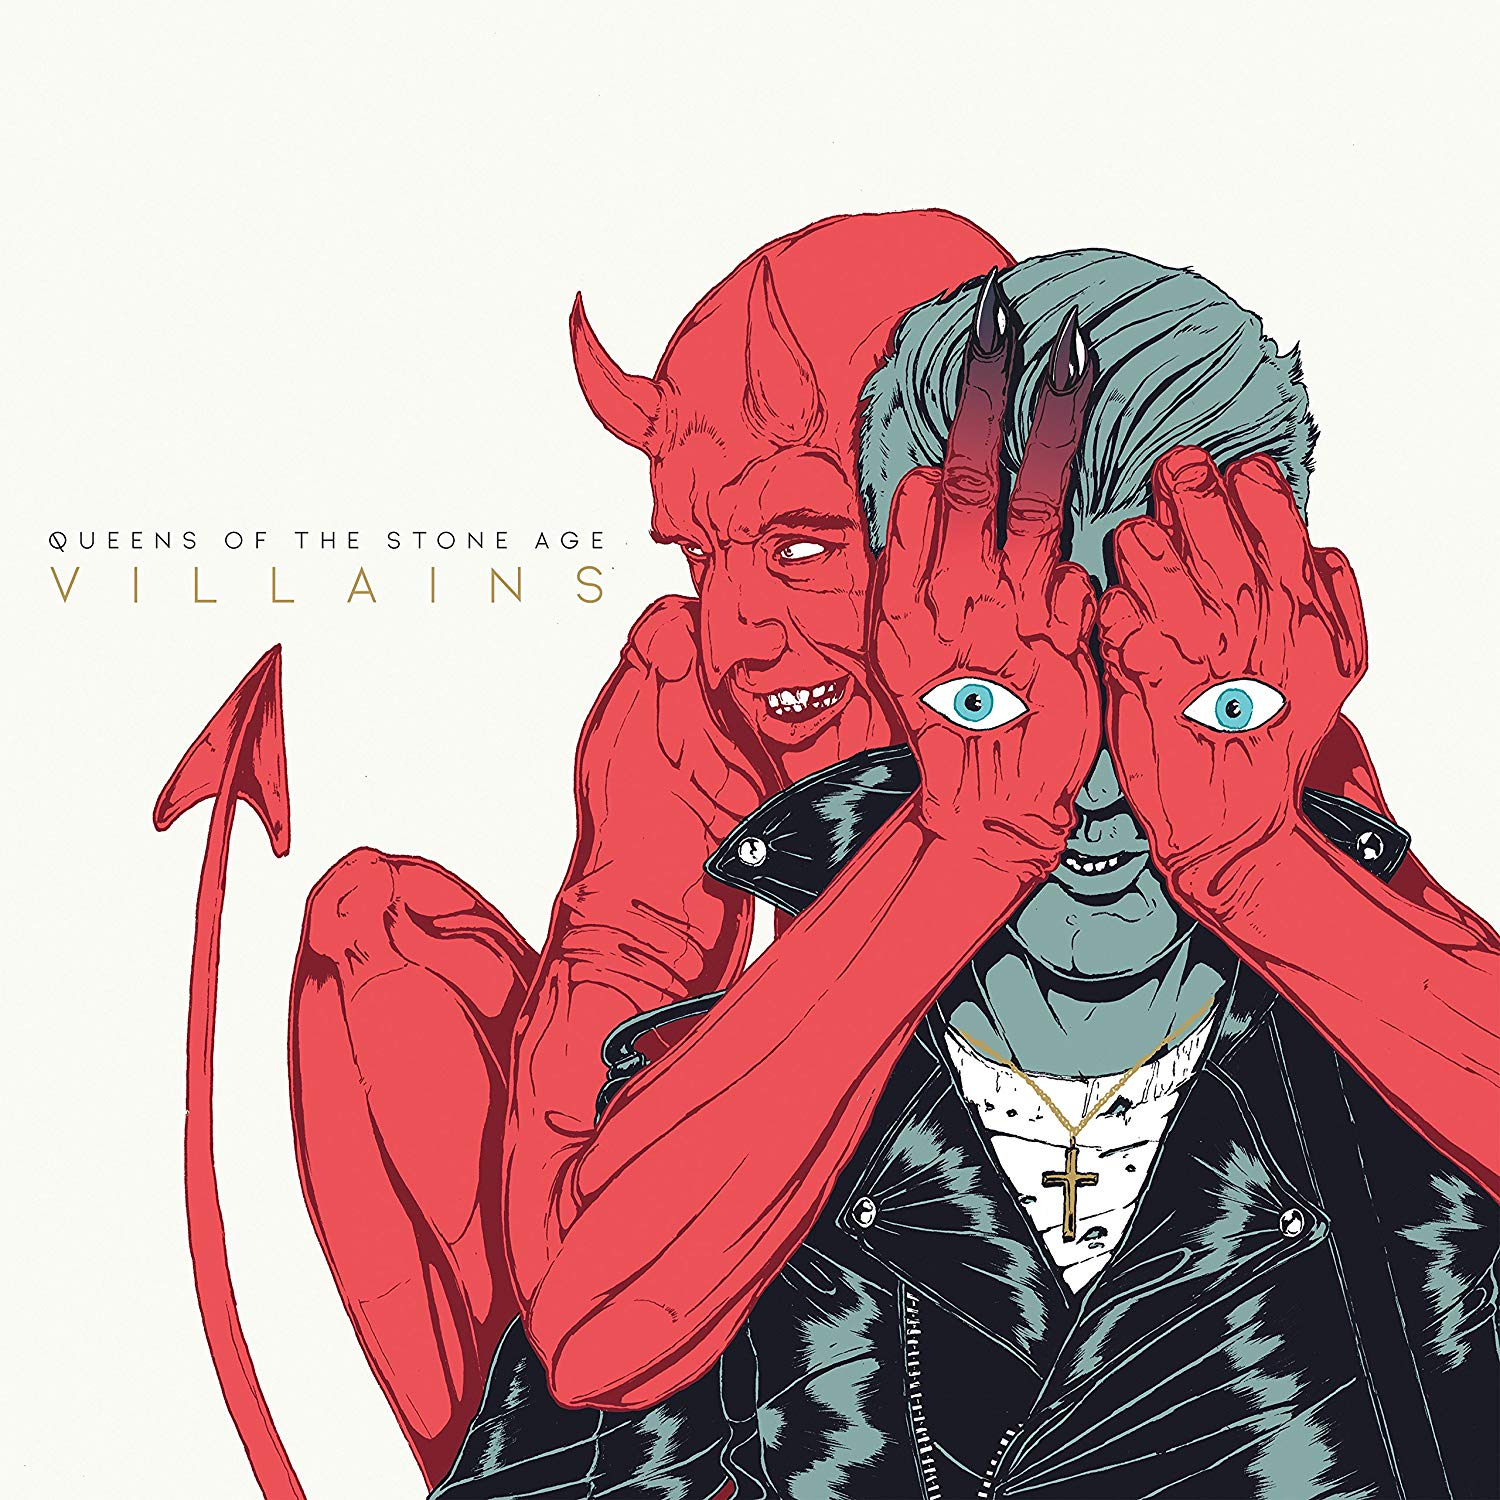 Queens of the Stone Age "Villains" 2LP